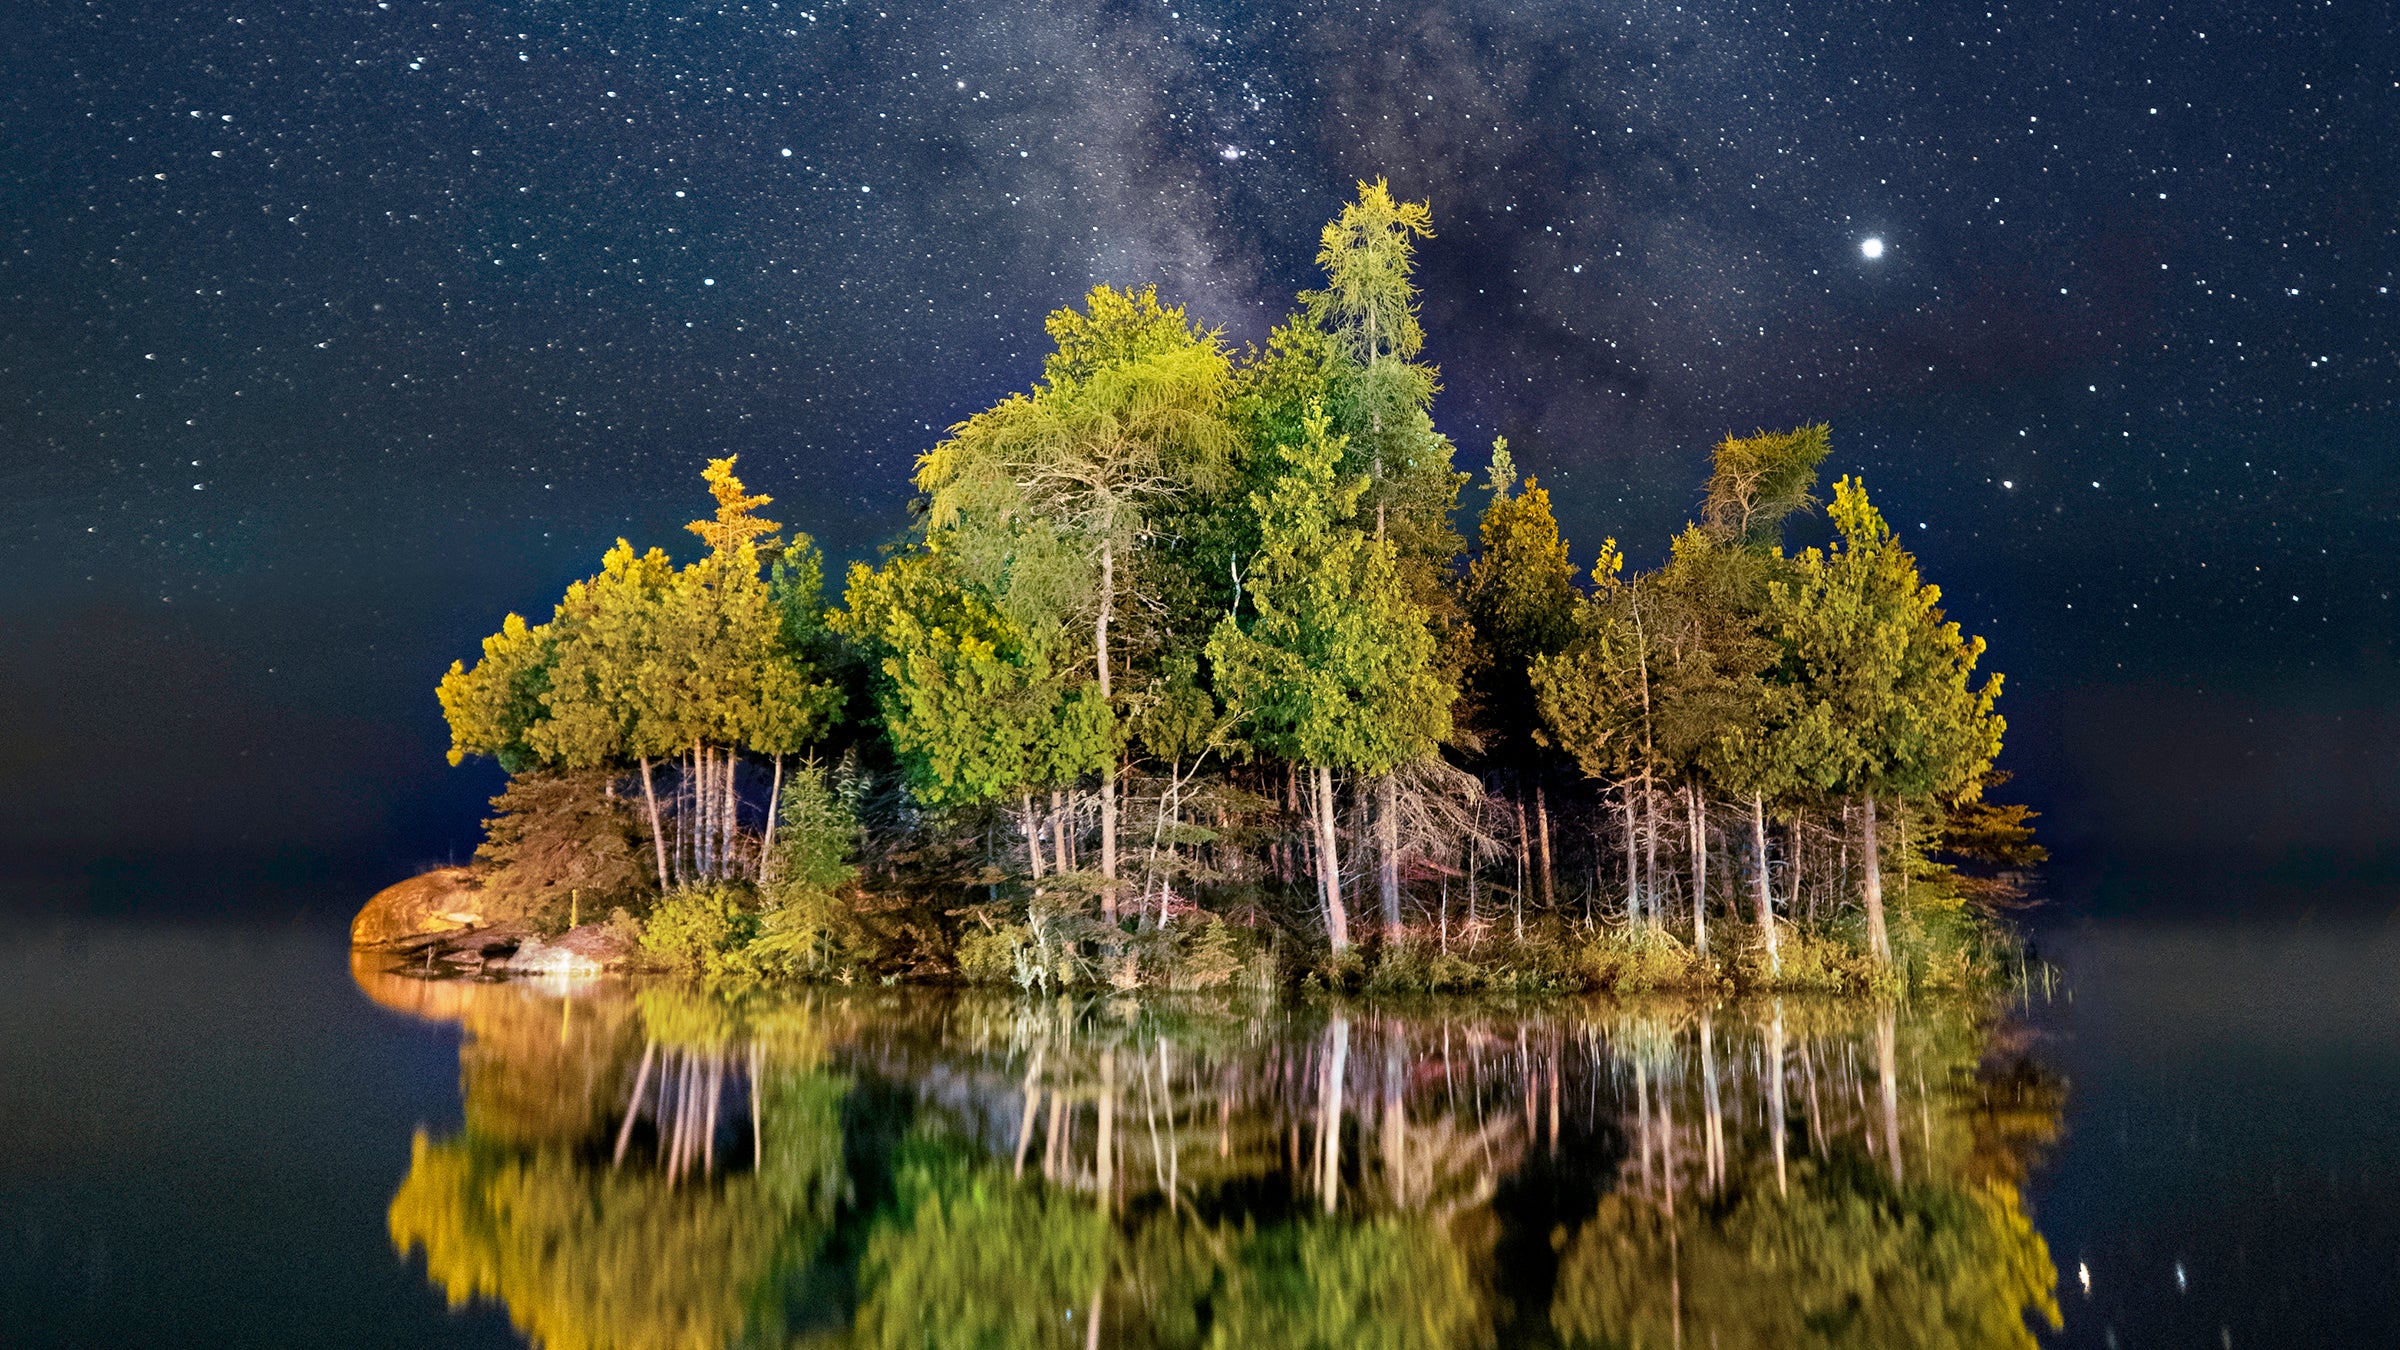 How to Shoot Stunning Landscape Photos at Night